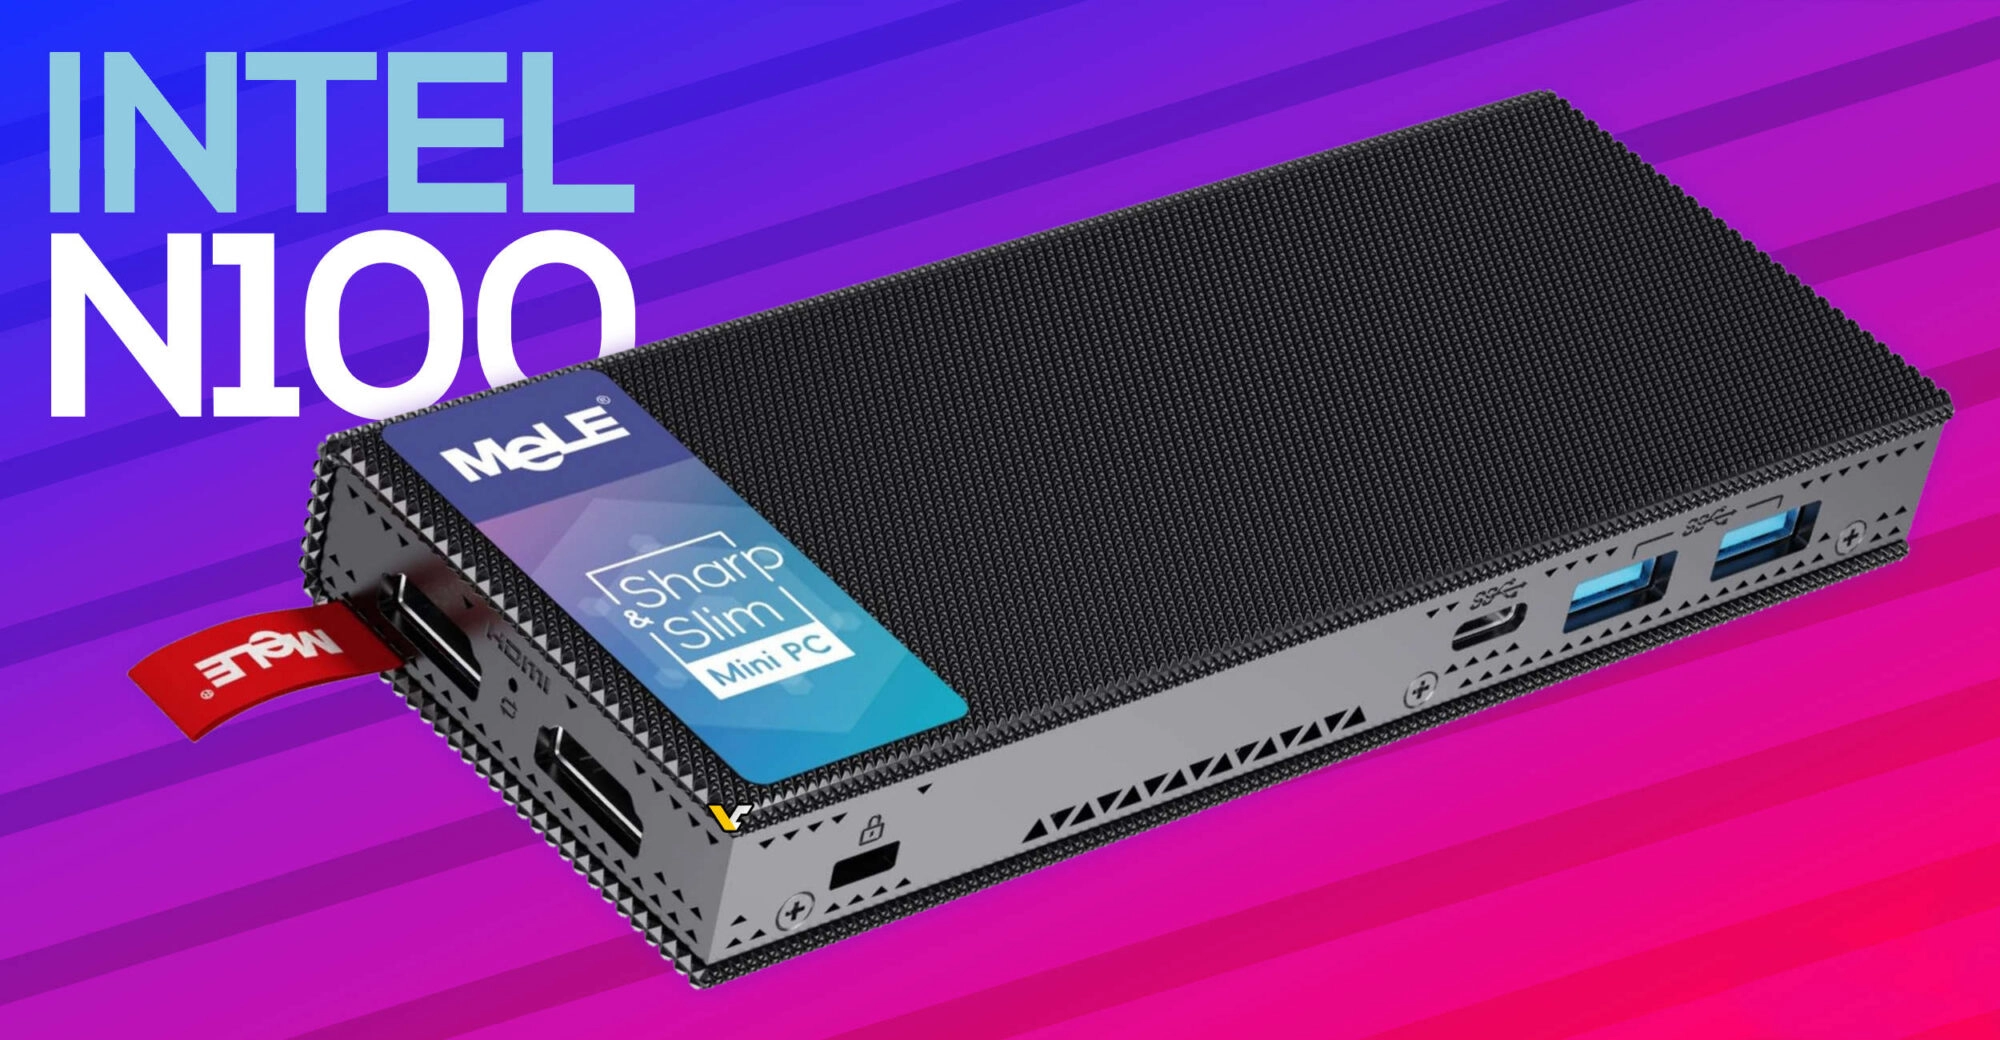 Pocket sized PC with Intel N100 “Alder Lake - N” CPU Comes in a fanless design